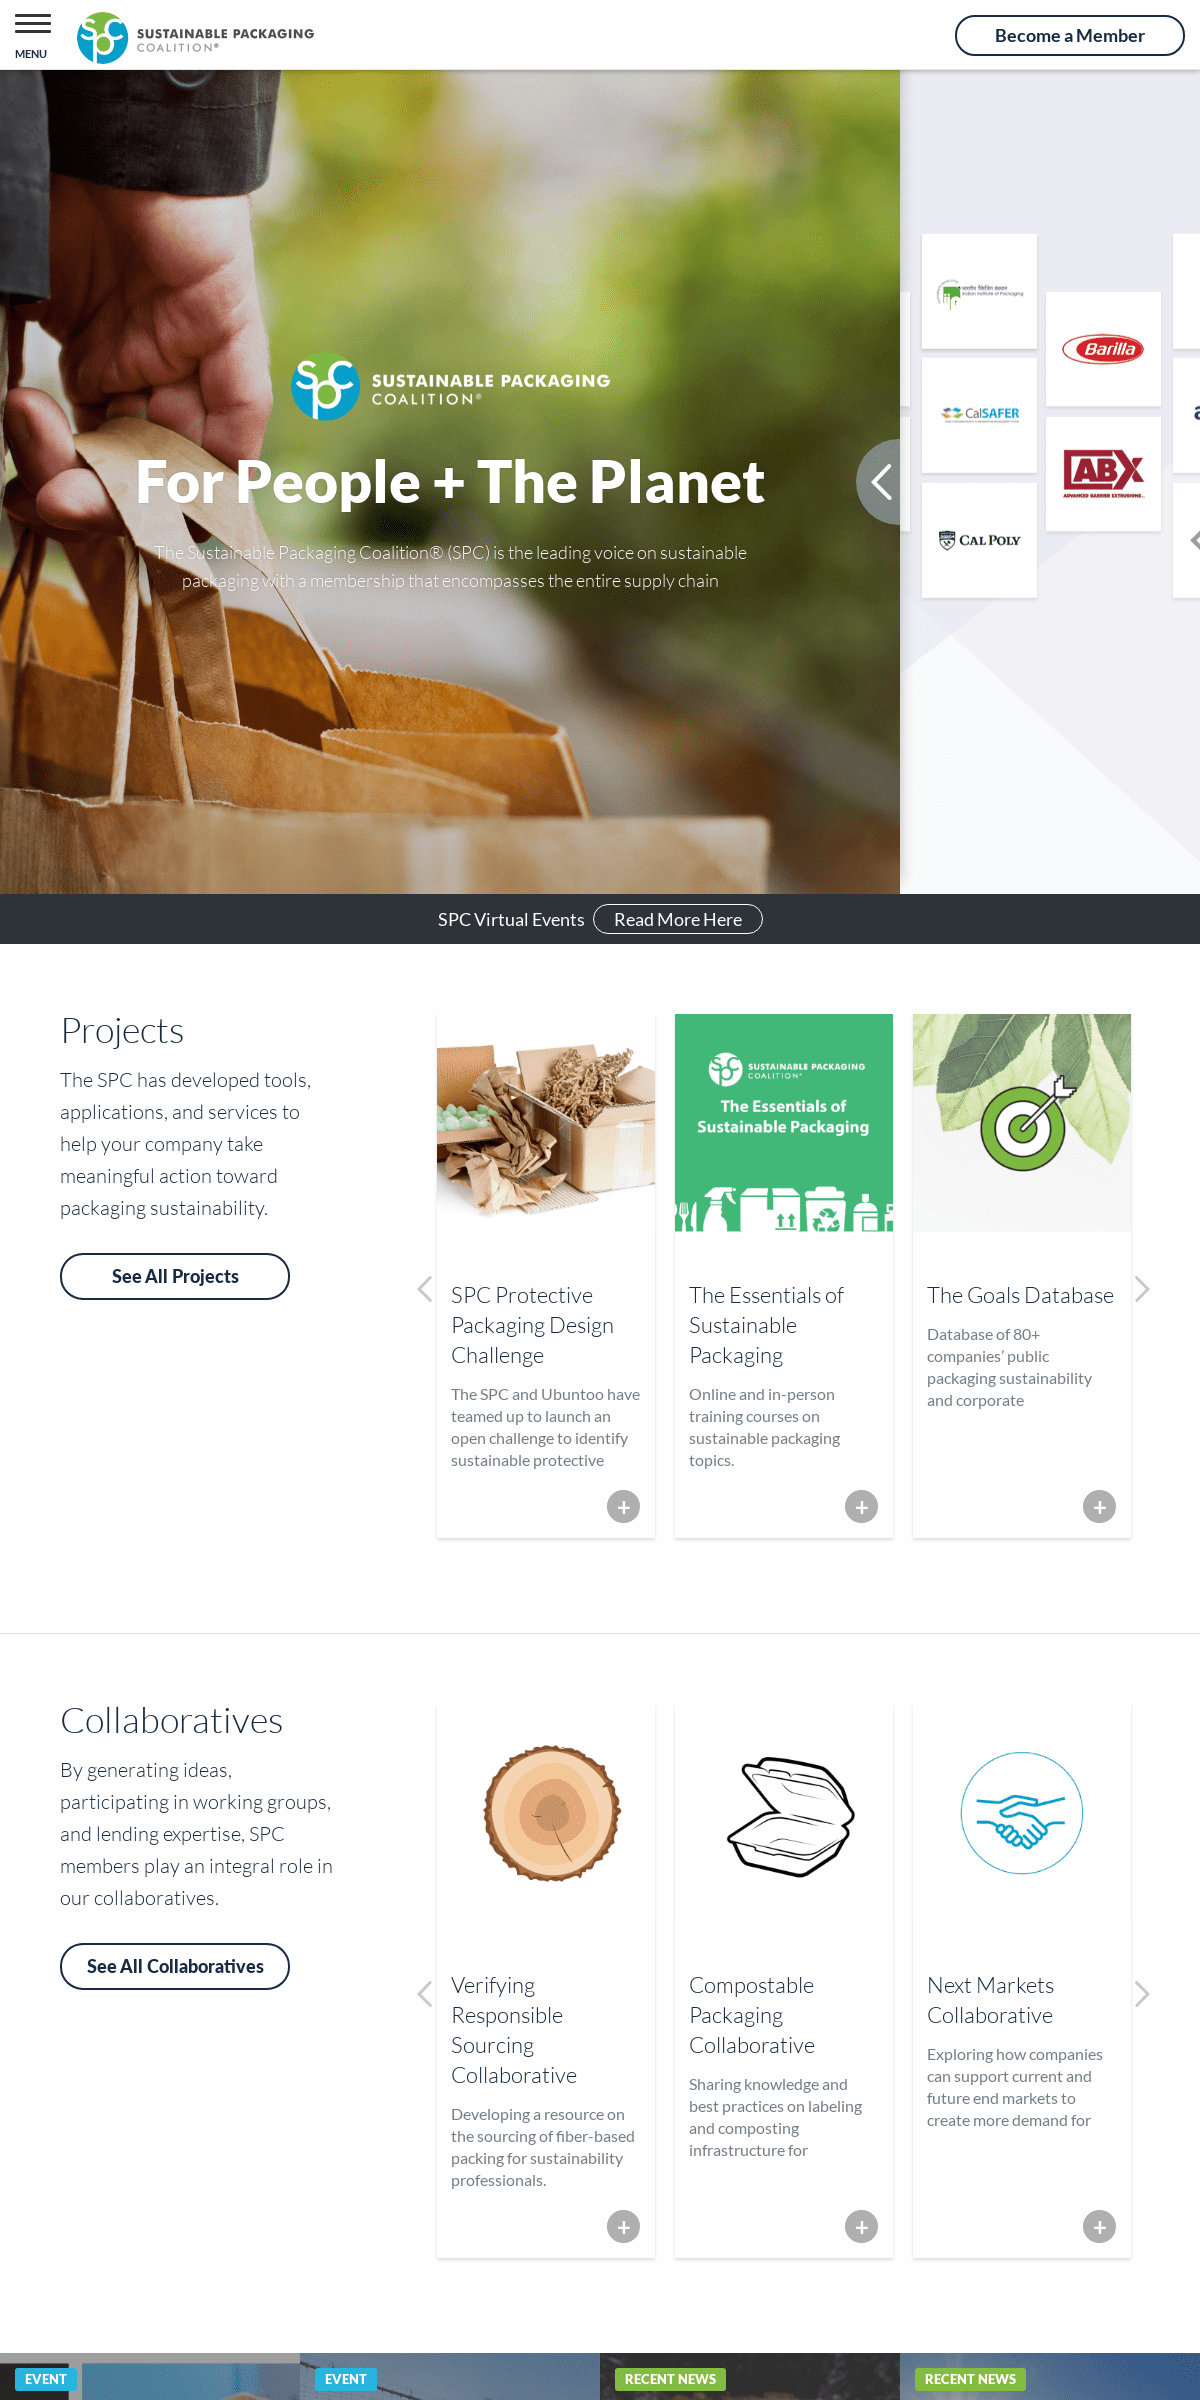 A complete backup of sustainablepackaging.org